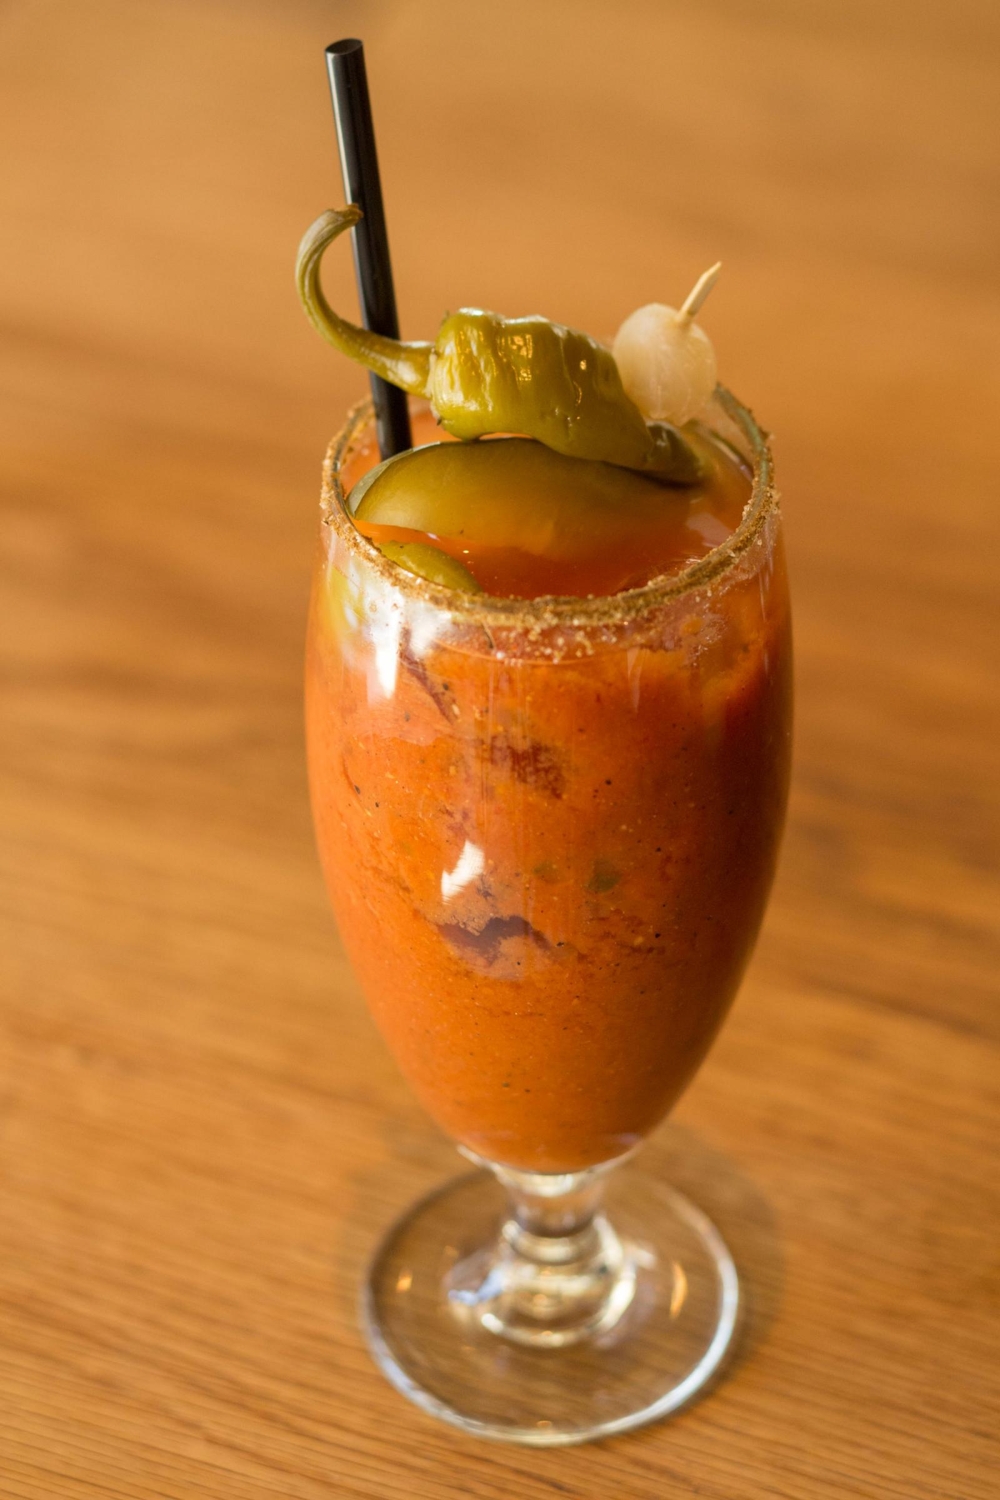 10 Bloody Mary recipes by Iron Chef Jose Garce.